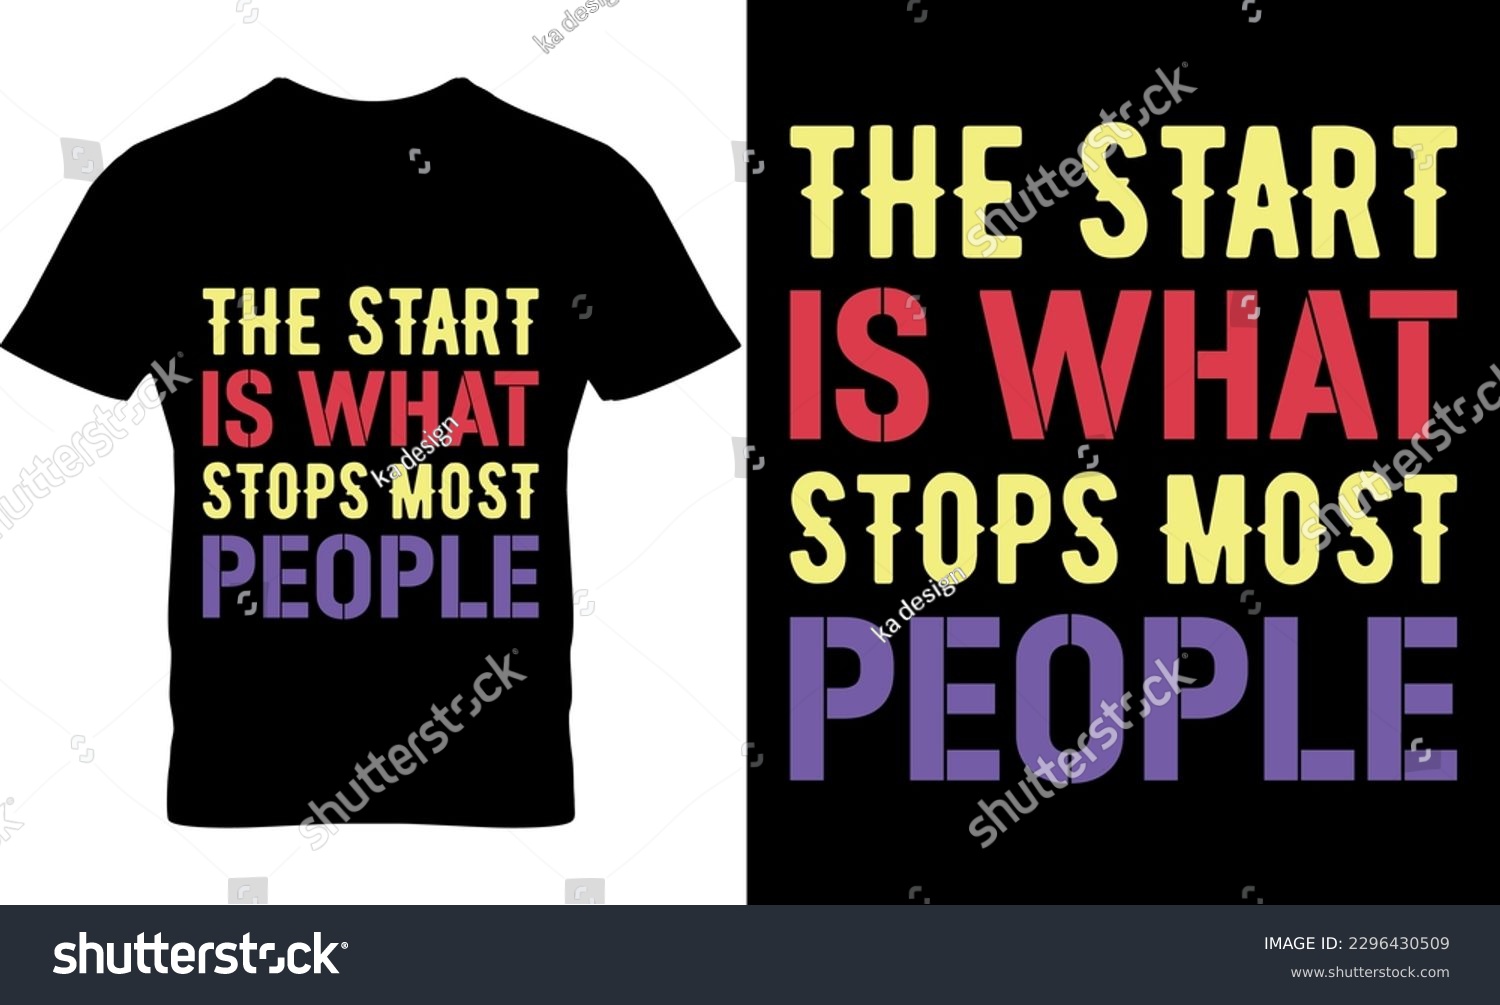 SVG of the start is what stops most people, Graphic, illustration, vector, typography, motivational, inspiration, inspiration t-shirt design, Typography t-shirt design, motivational t-shirt svg